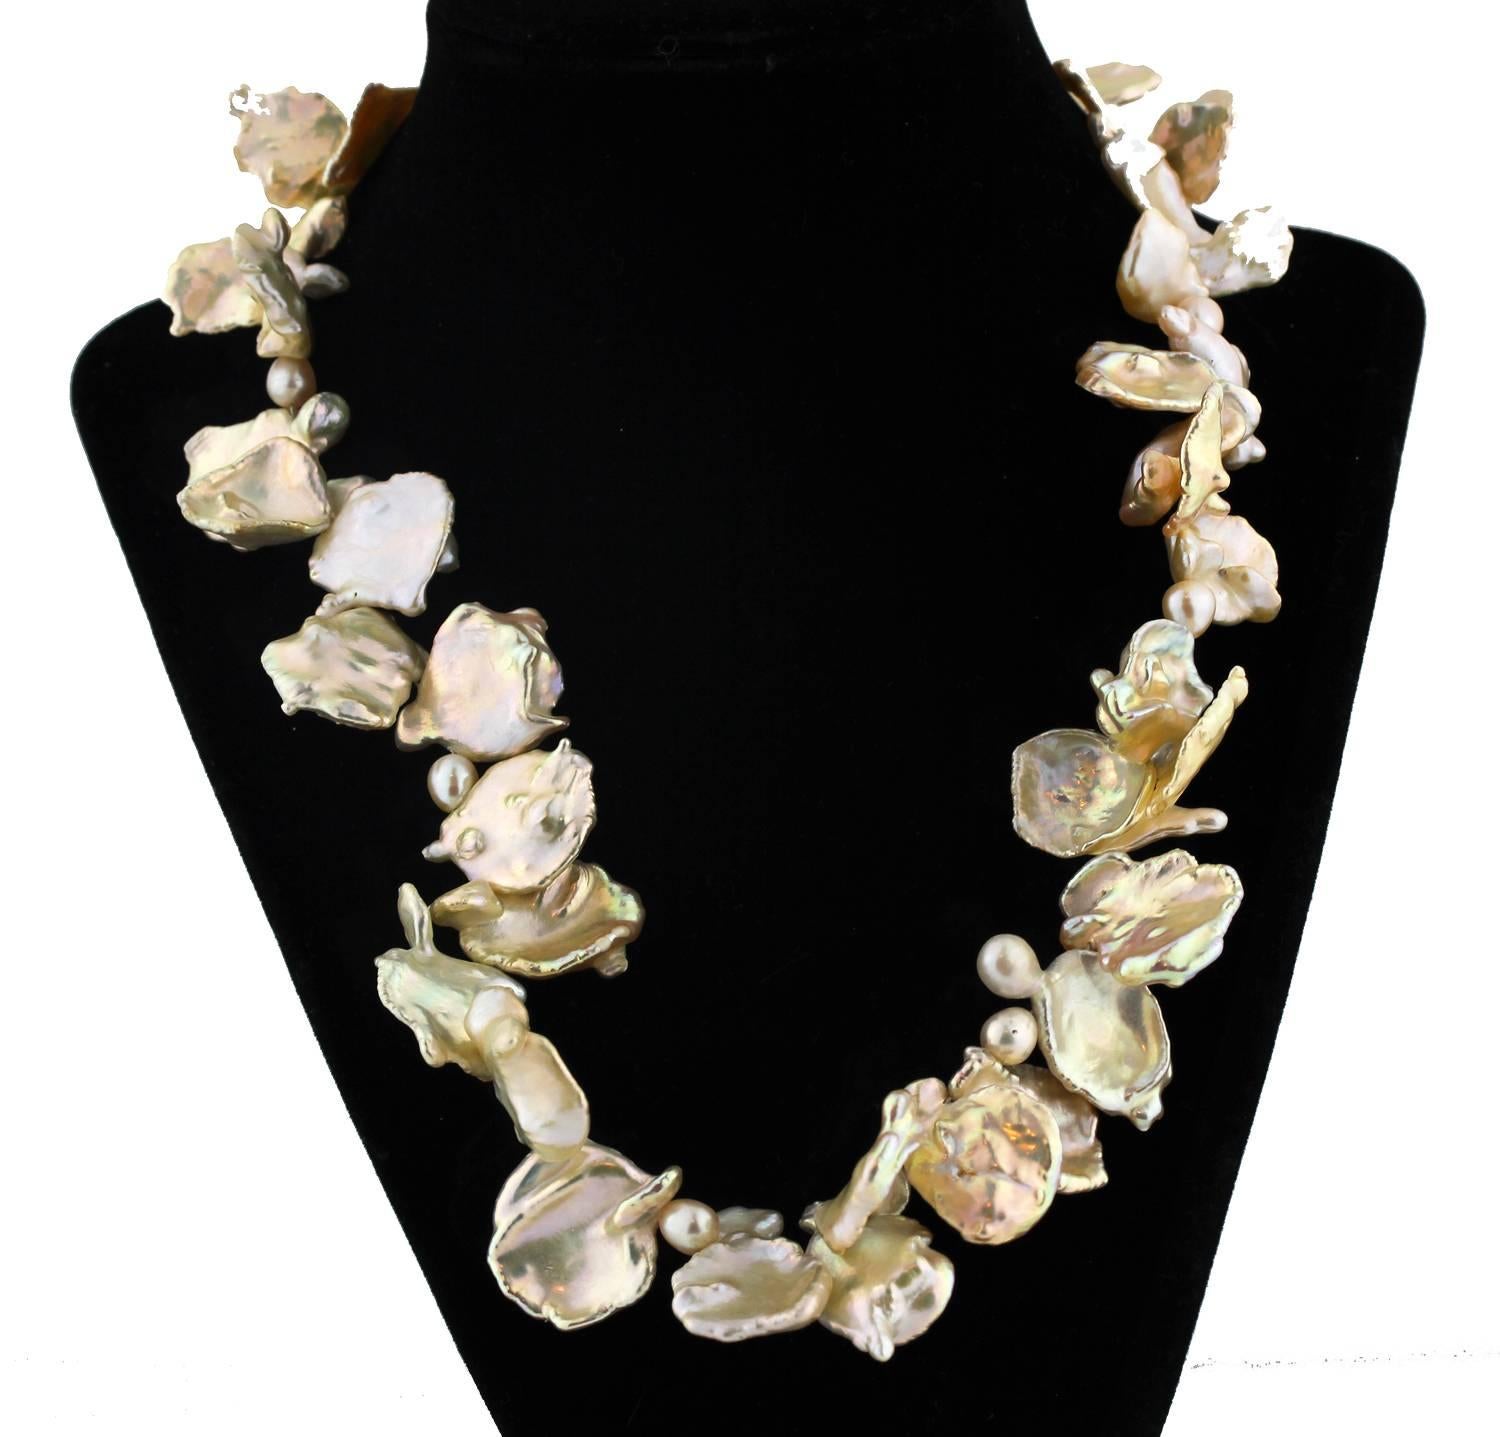 These Keshi Pearls enhanced, with smaller peanut Pearls, looks like a beautiful bouquet around your neck which you can arrange in many different looks when you put it on. 
Size:  up to approximately 27 mm
Length:  19.5 inches
Clasp:  gold plated